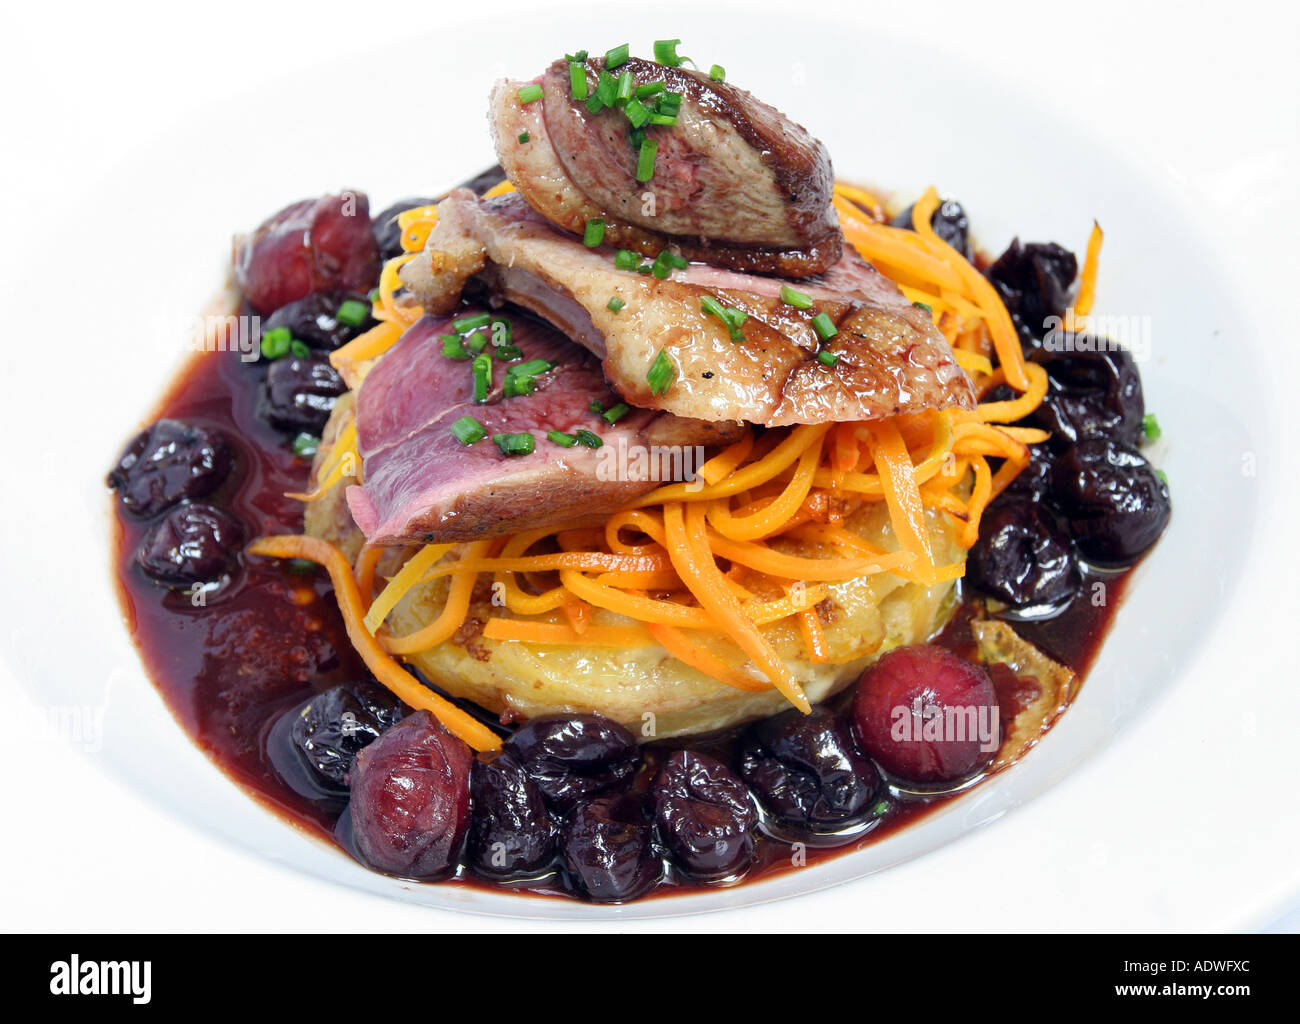 Duck served on a plate in a restaurant Stock Photo